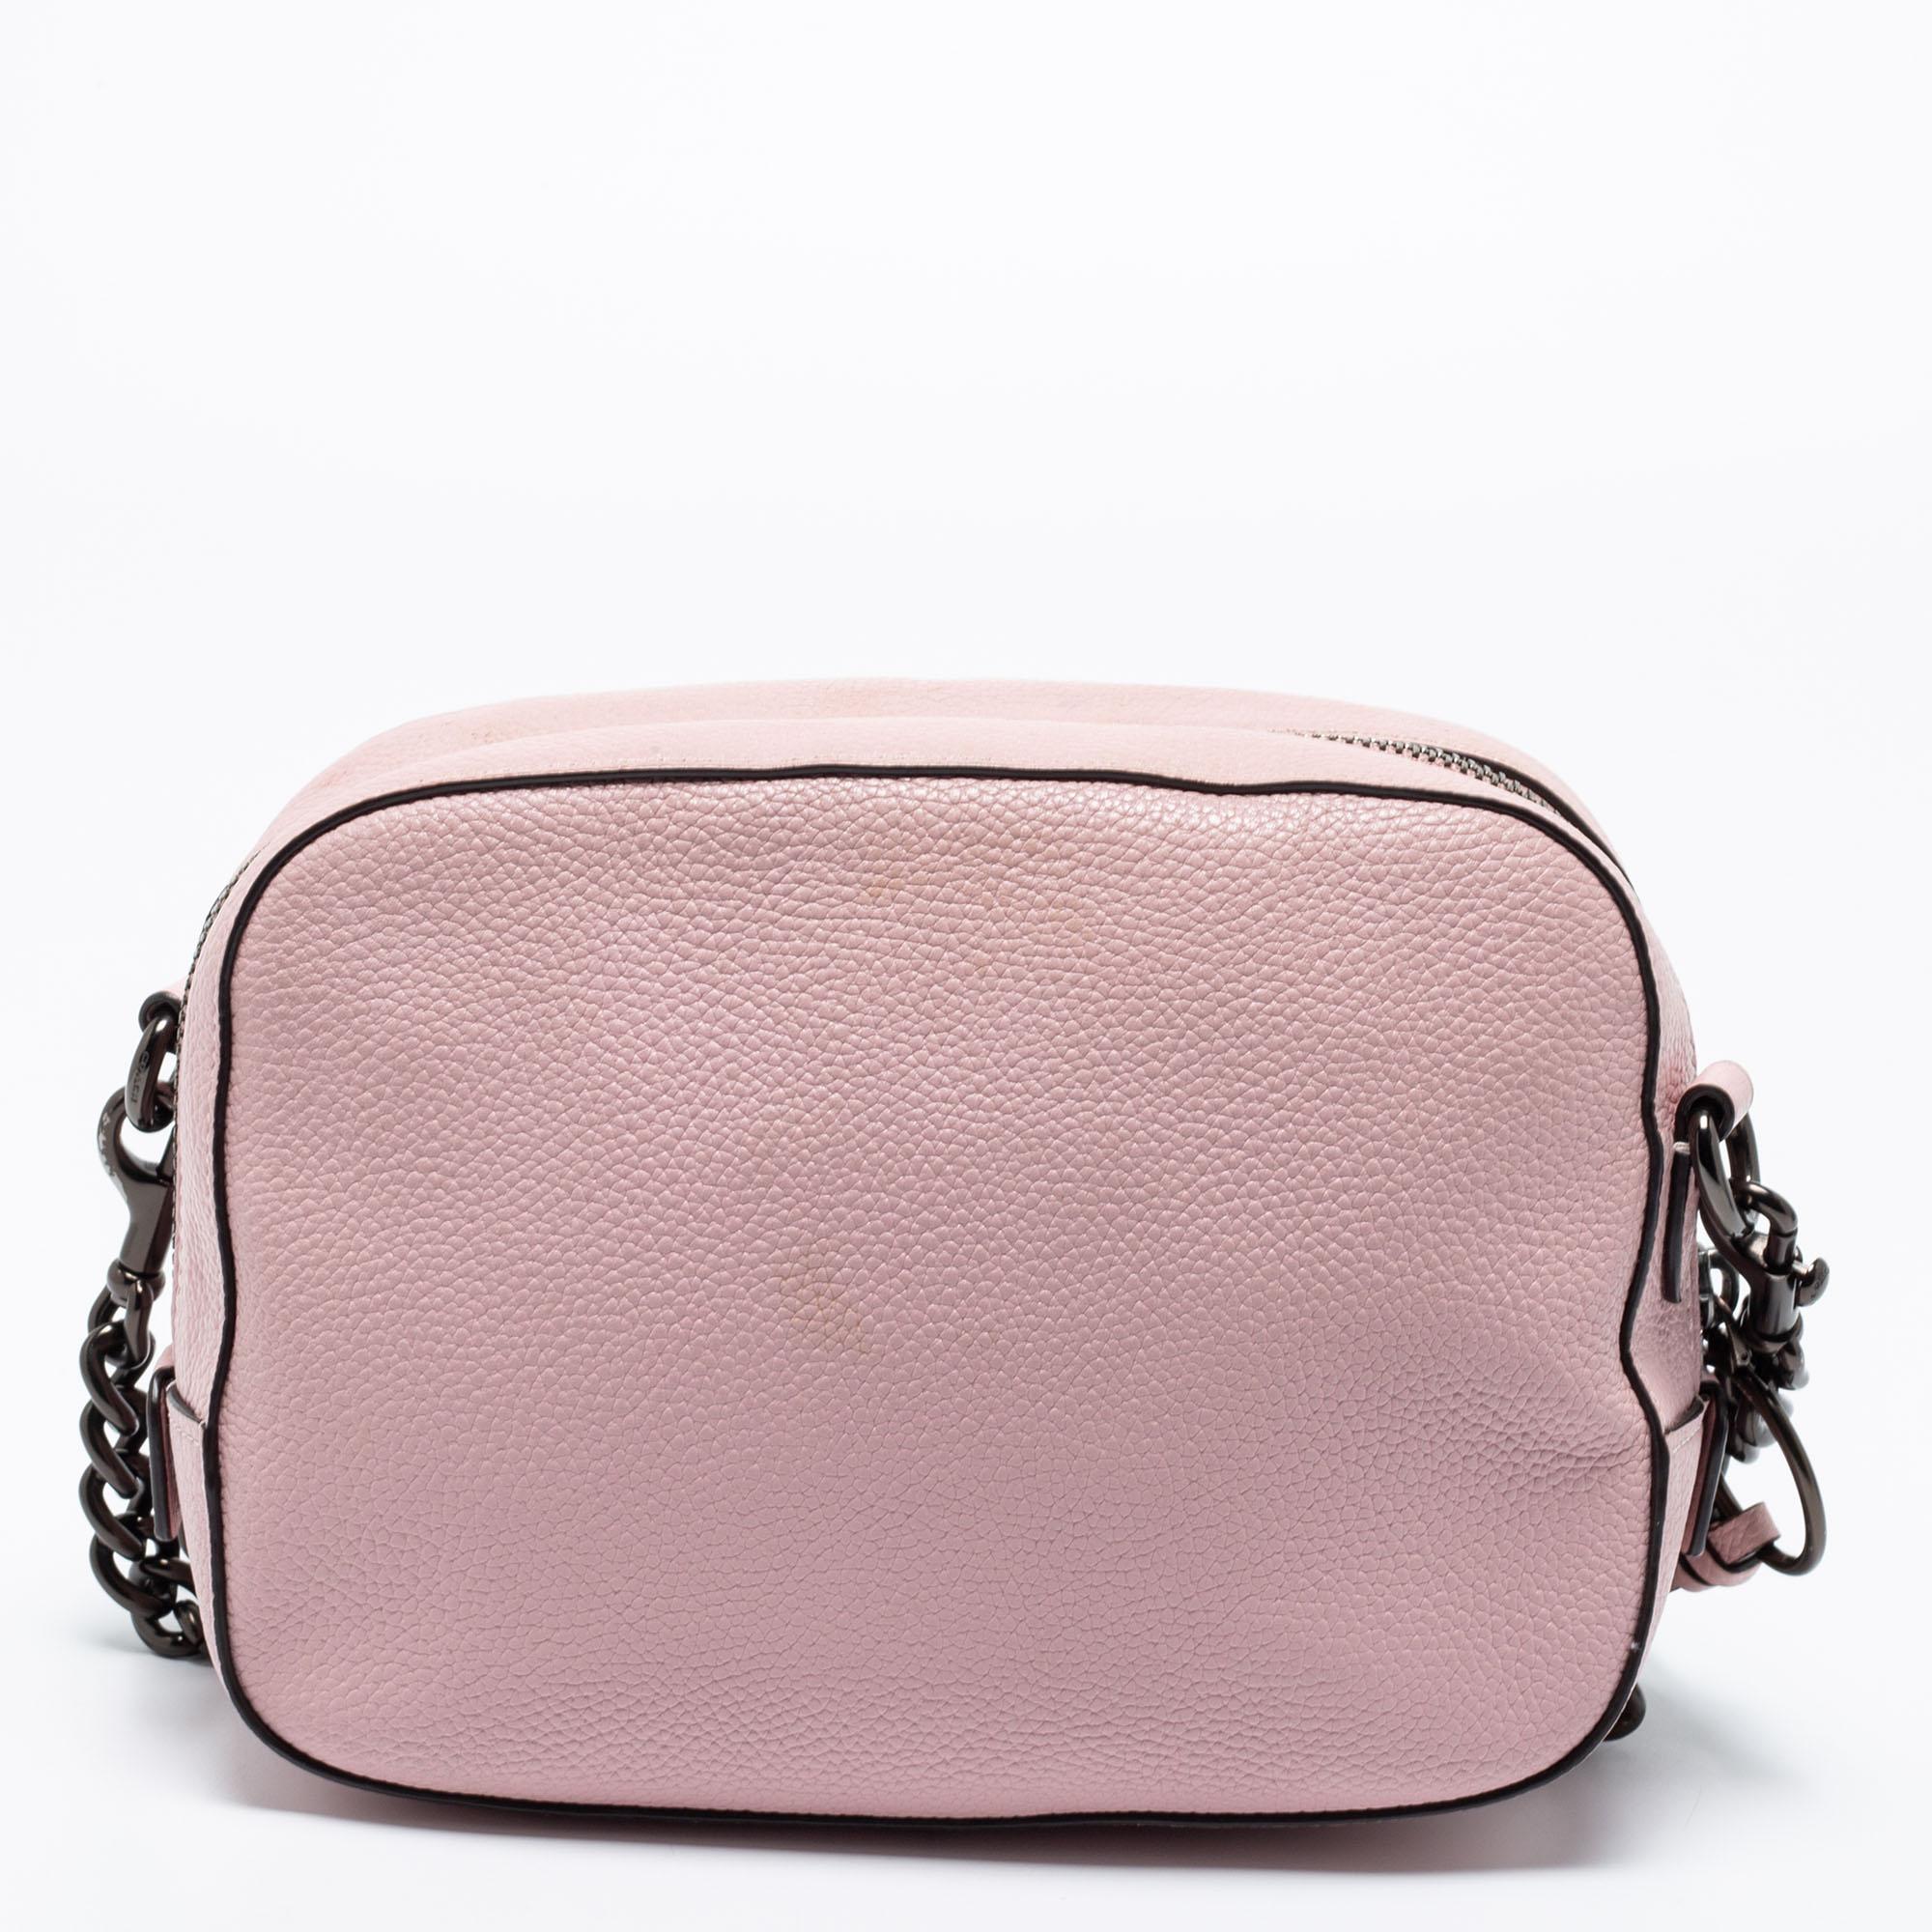 Elegance meets luxury in this Camera shoulder bag from the House of Coach. It is created using pink pebbled leather, with a logo motif perched on the front. It features a fabric-lined interior, black-tone hardware, and a sturdy strap. This bag will